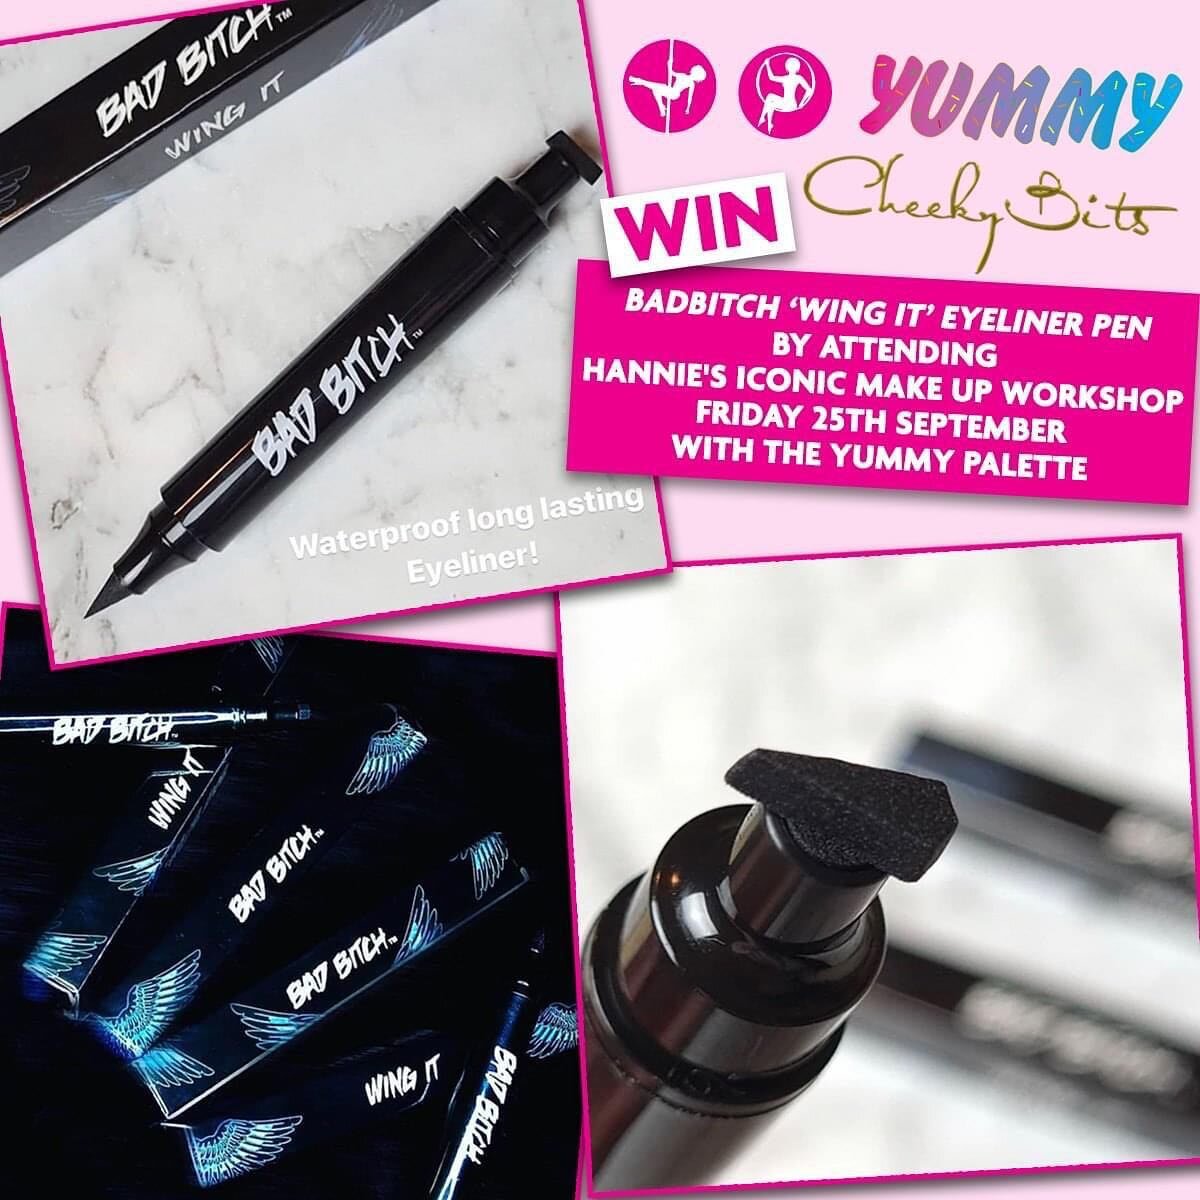 COMPETITION TIME!!! 😱🥳😎

WIN the NEW Cheeky Bits BADBITCH &lsquo;WING IT&rsquo; eyeliner pen by attending Hannie's Iconic Make Up workshop Friday 25th September with the YUMMY palette.
How to win:
1. Follow @cheekybitsofficial , @yummytheshow and 